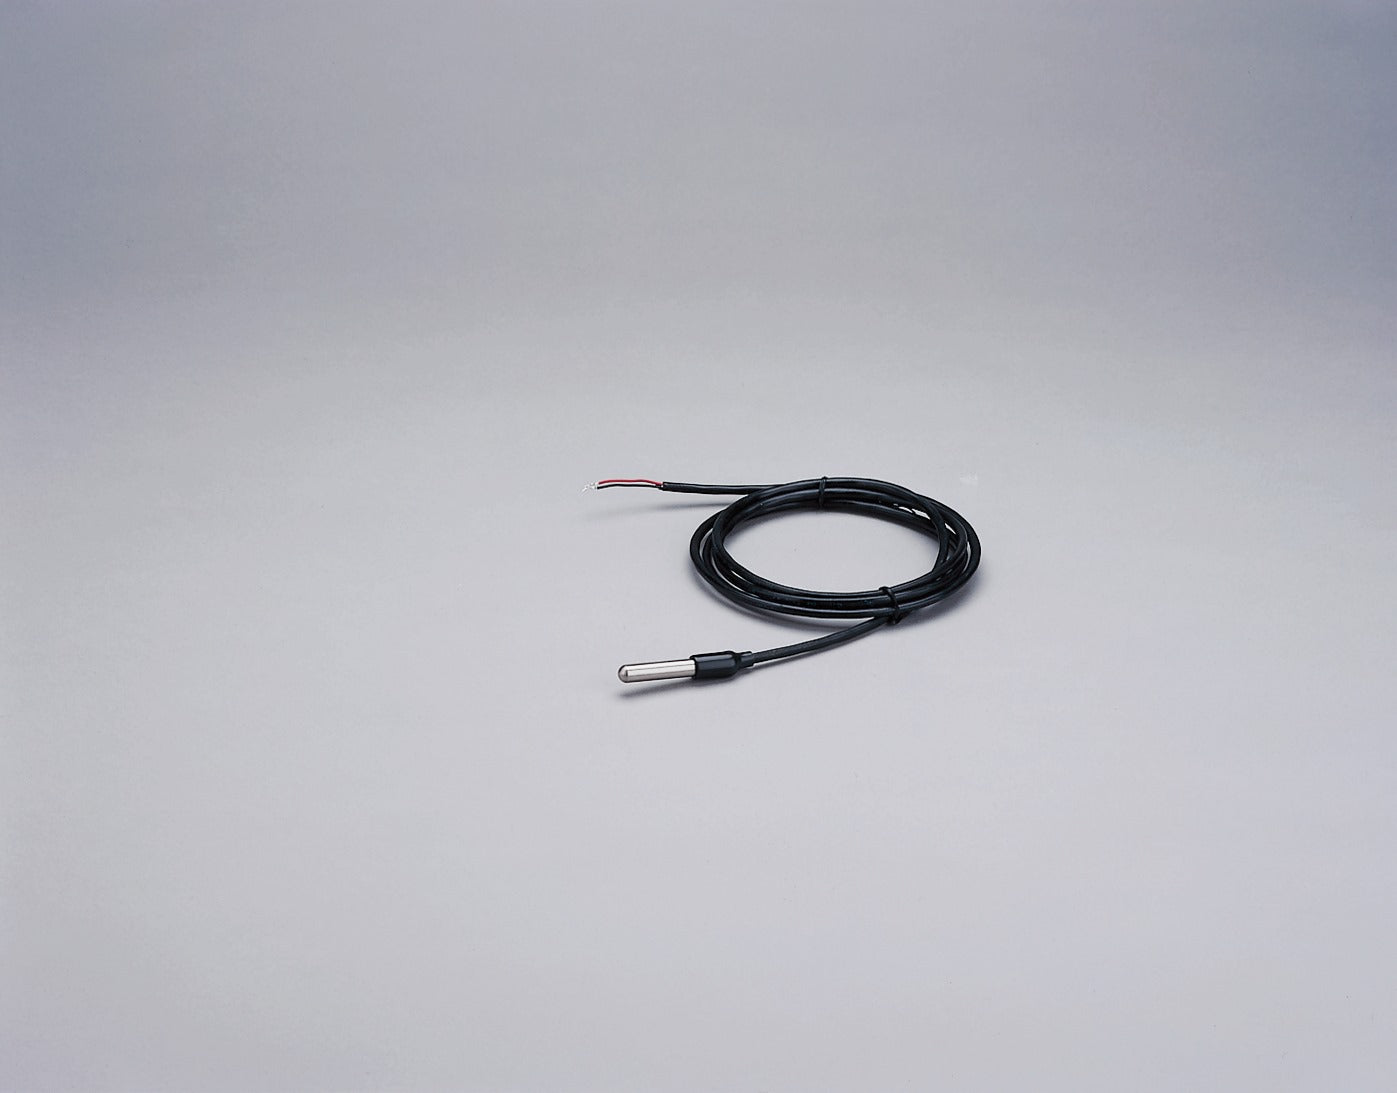 Stainless Steel Temperature Probe with Two-Wire Termination - SKU 6470